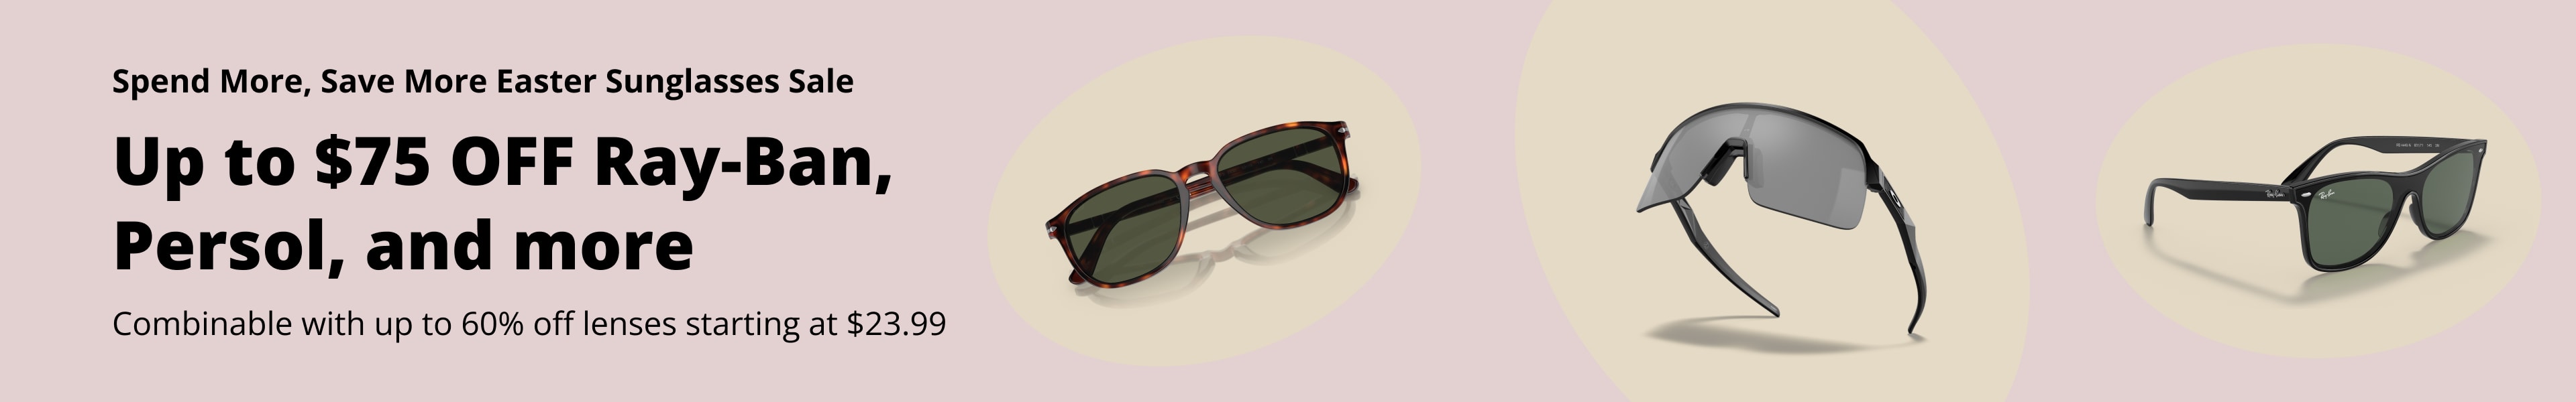 Easter Sun Sale: Up to $75 Off Ray-Ban, Persol, and more